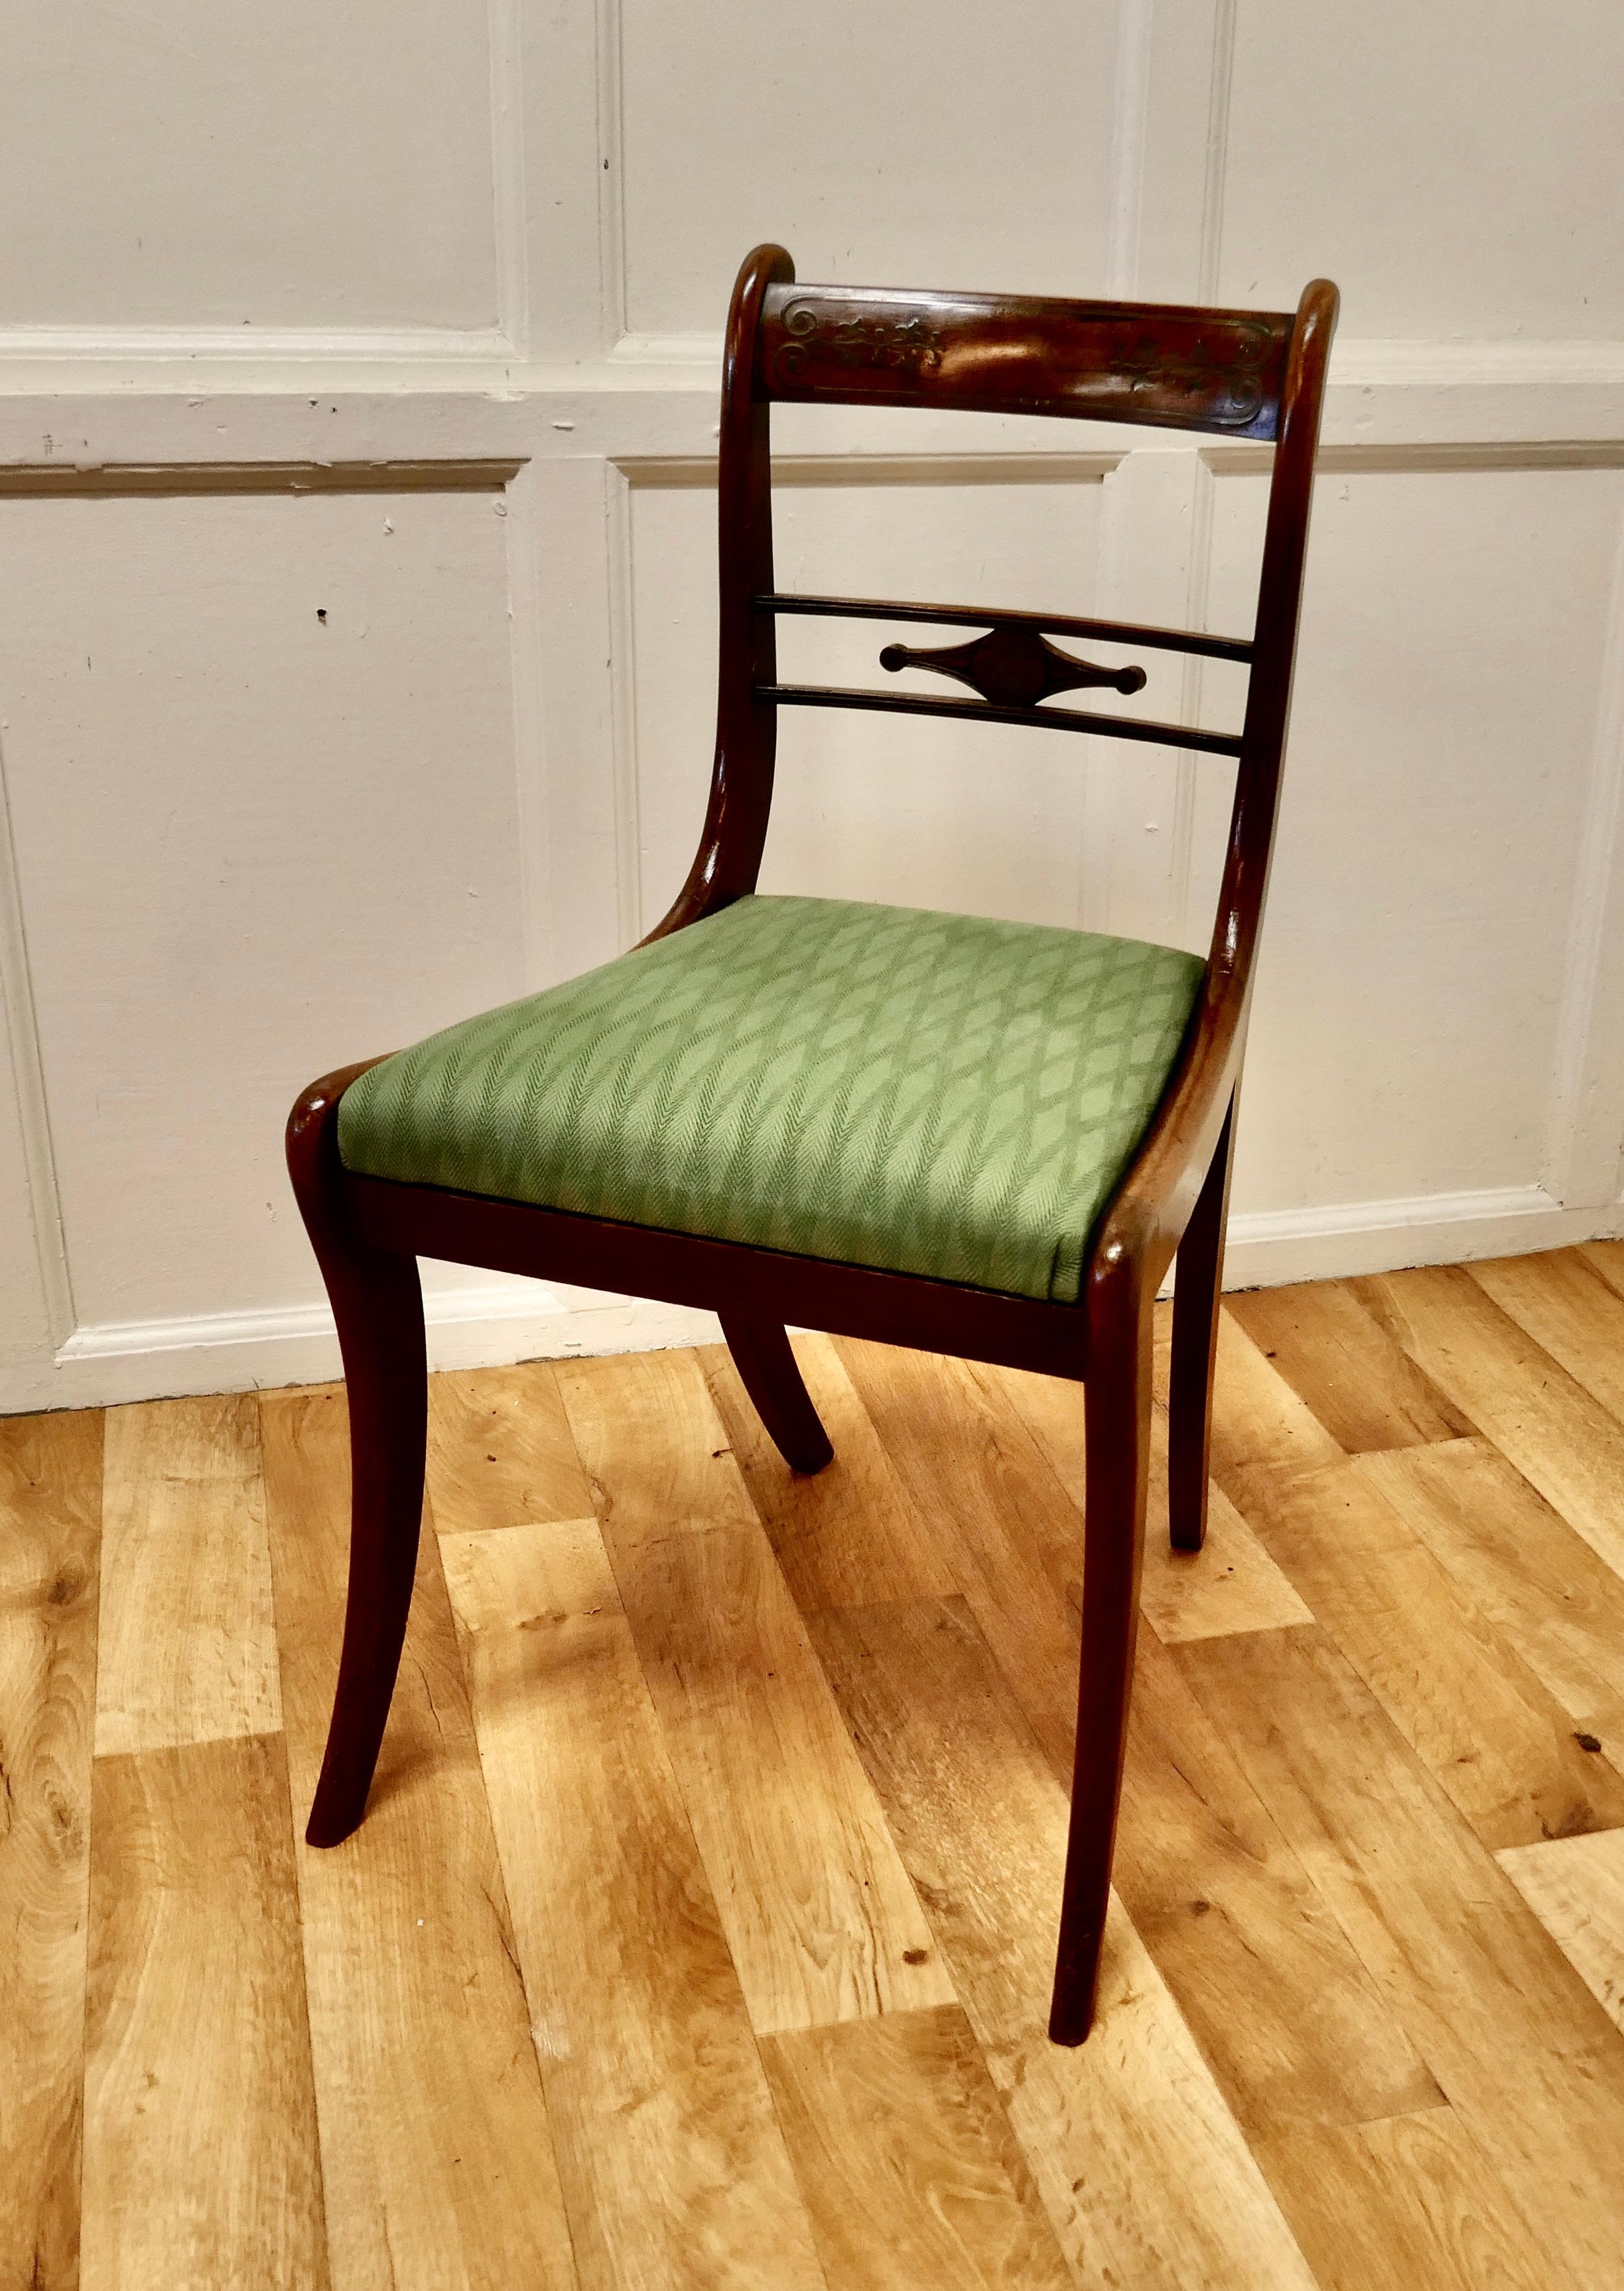 Regency desk chair with brass inlay decoration
 
A very attractive chair which has a broad back top rail, this is intricately inlaid with Fine brass inlay
The chair has attractive sabre legs and a Trafalgar seat upholstered in a 2 tone